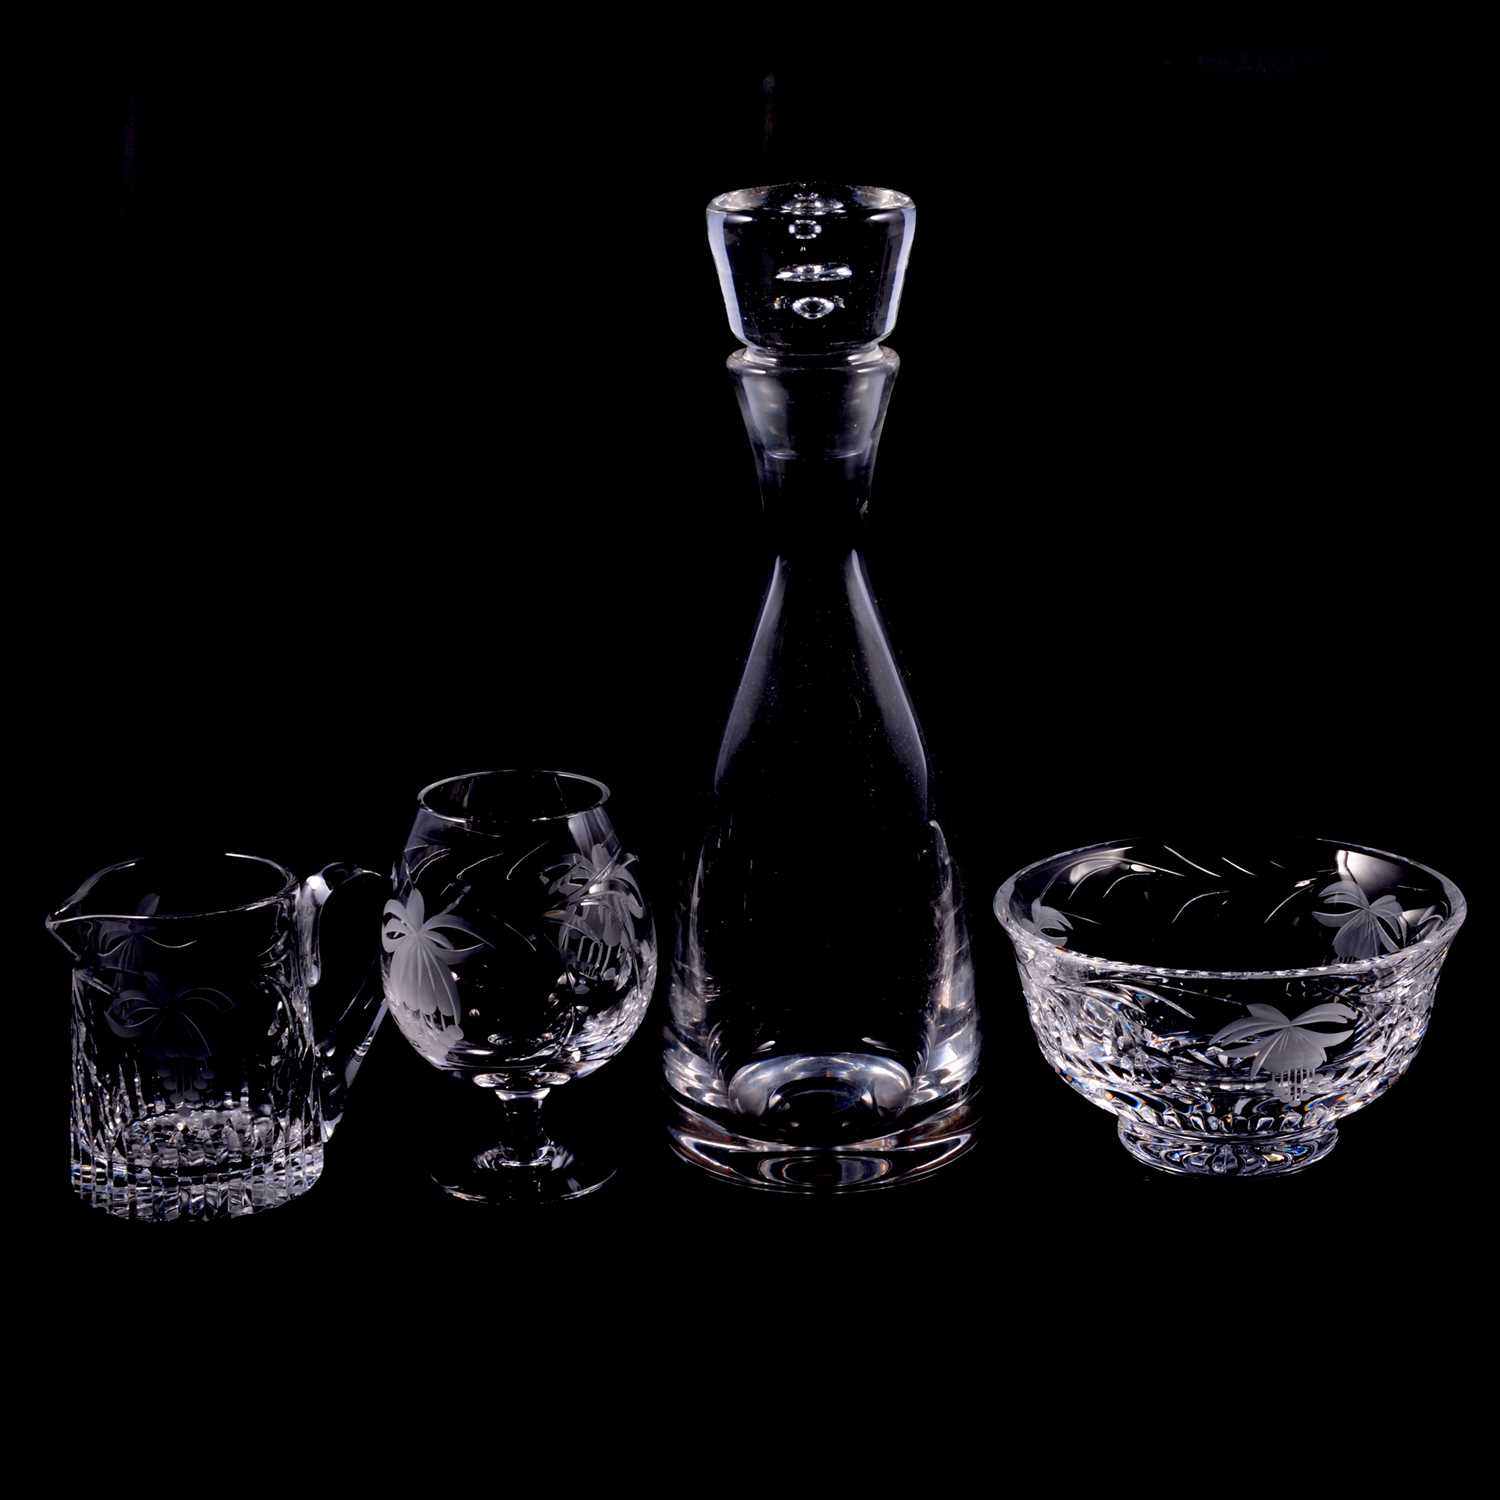 Lot 62 - Royal Brierley Crystal glassware, Ronald Stennett Wilson Wedgwood decanter, boxed plated dish